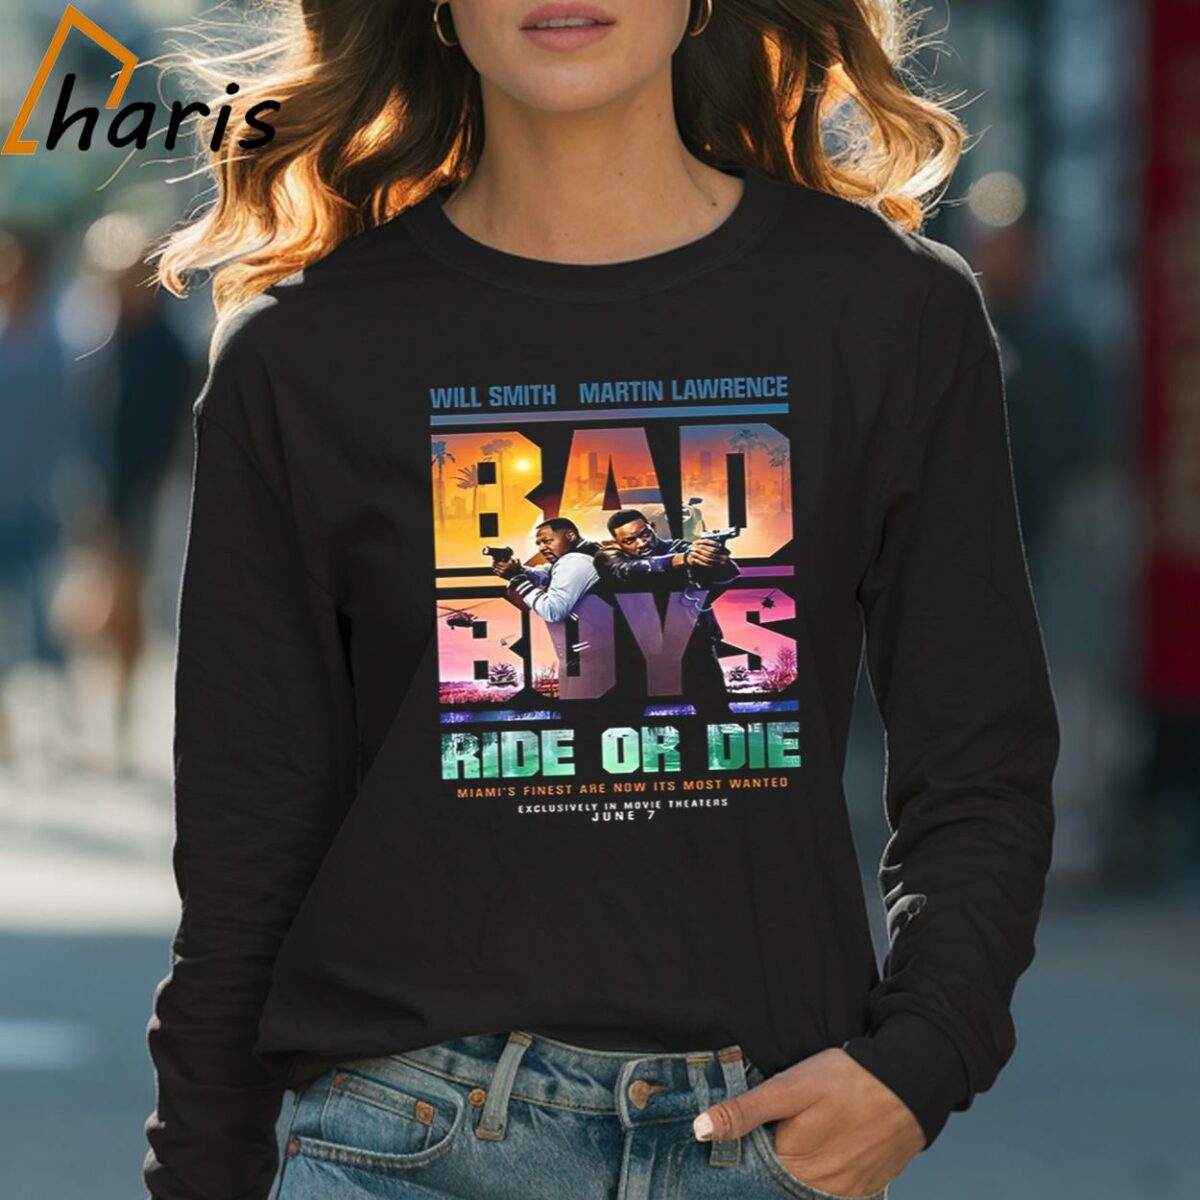 First Poster For Bad Boys Rise Or Die In Theaters On June 7 Unisex T Shirt 4 Long sleeve shirt